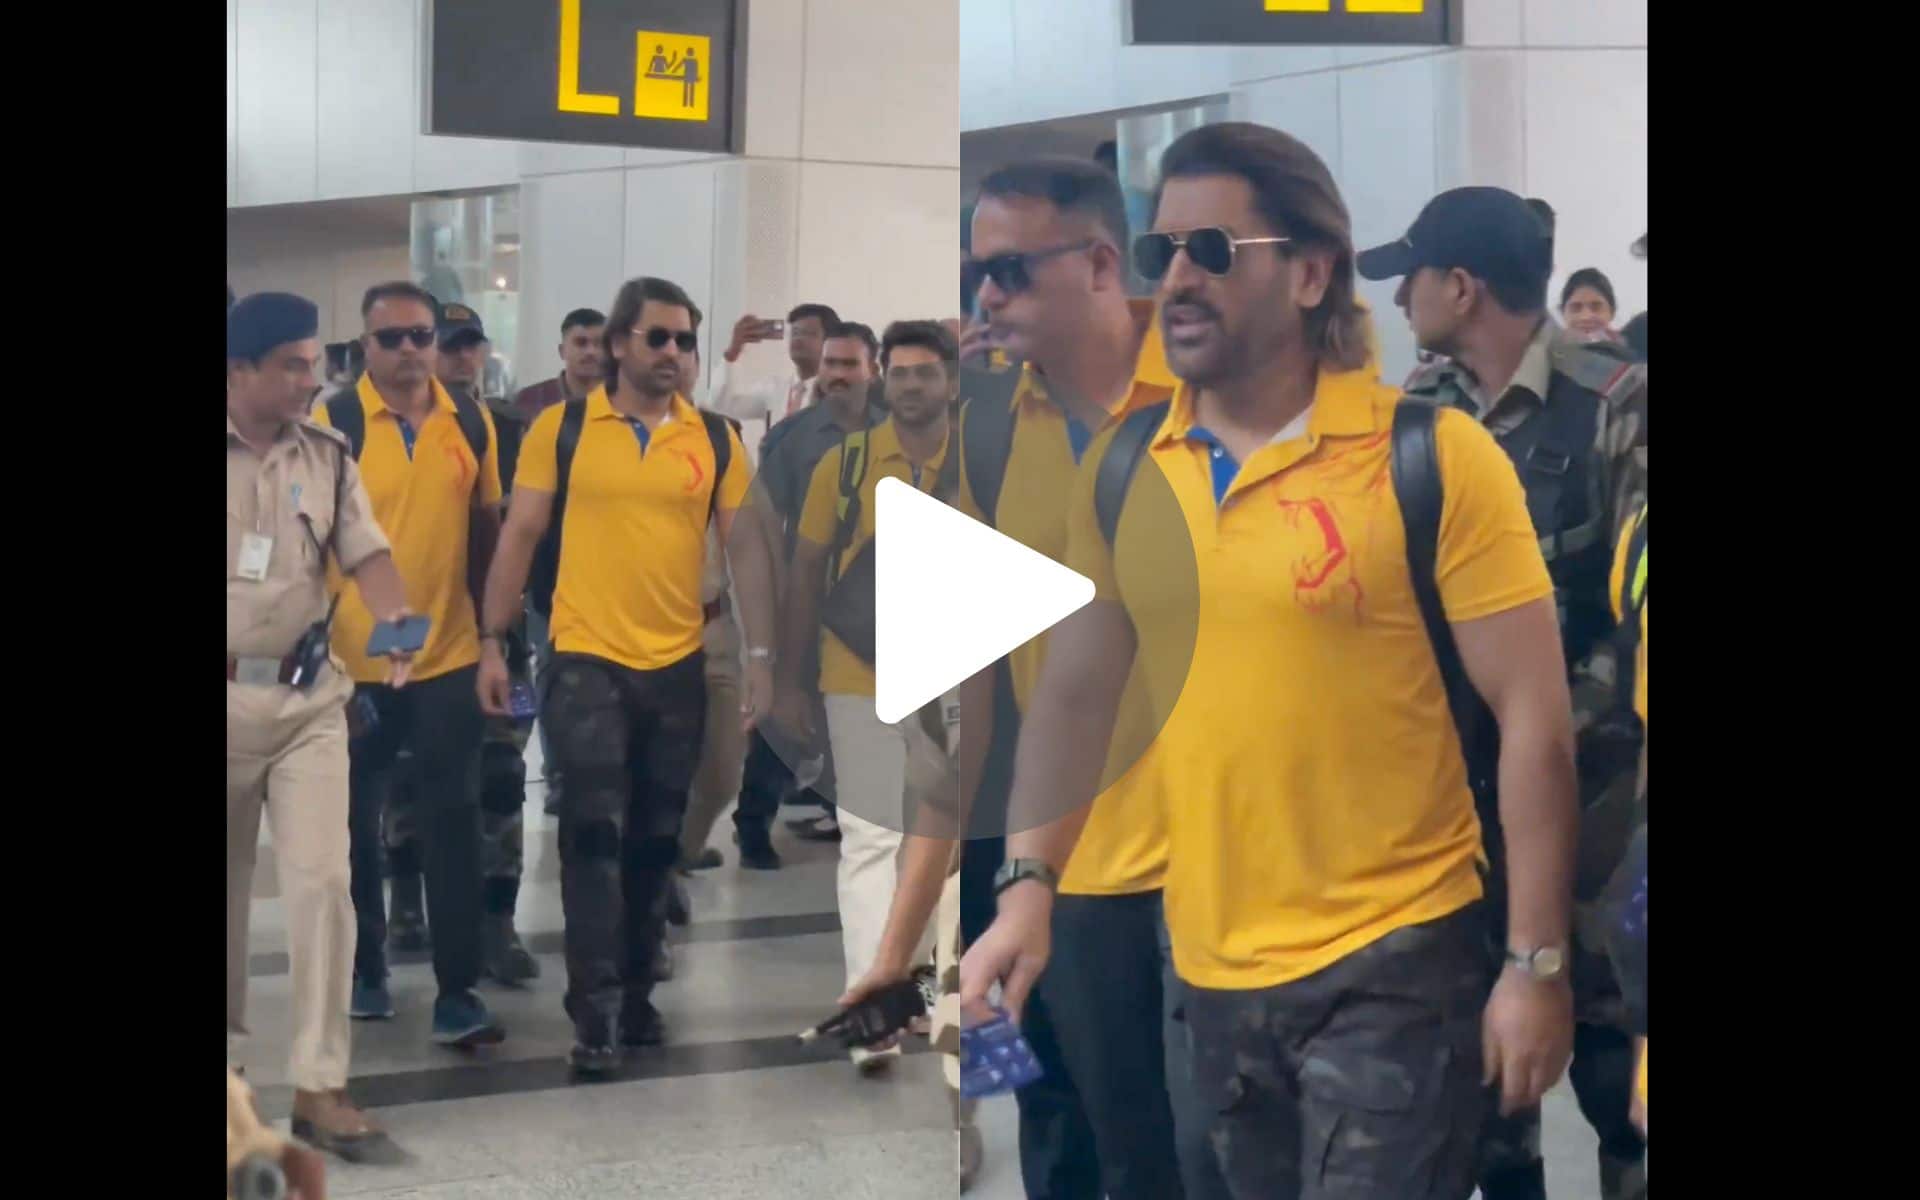 [Watch] MS Dhoni Lands In Chennai For CSK Vs KKR; Crowd Offers Mass Welcome